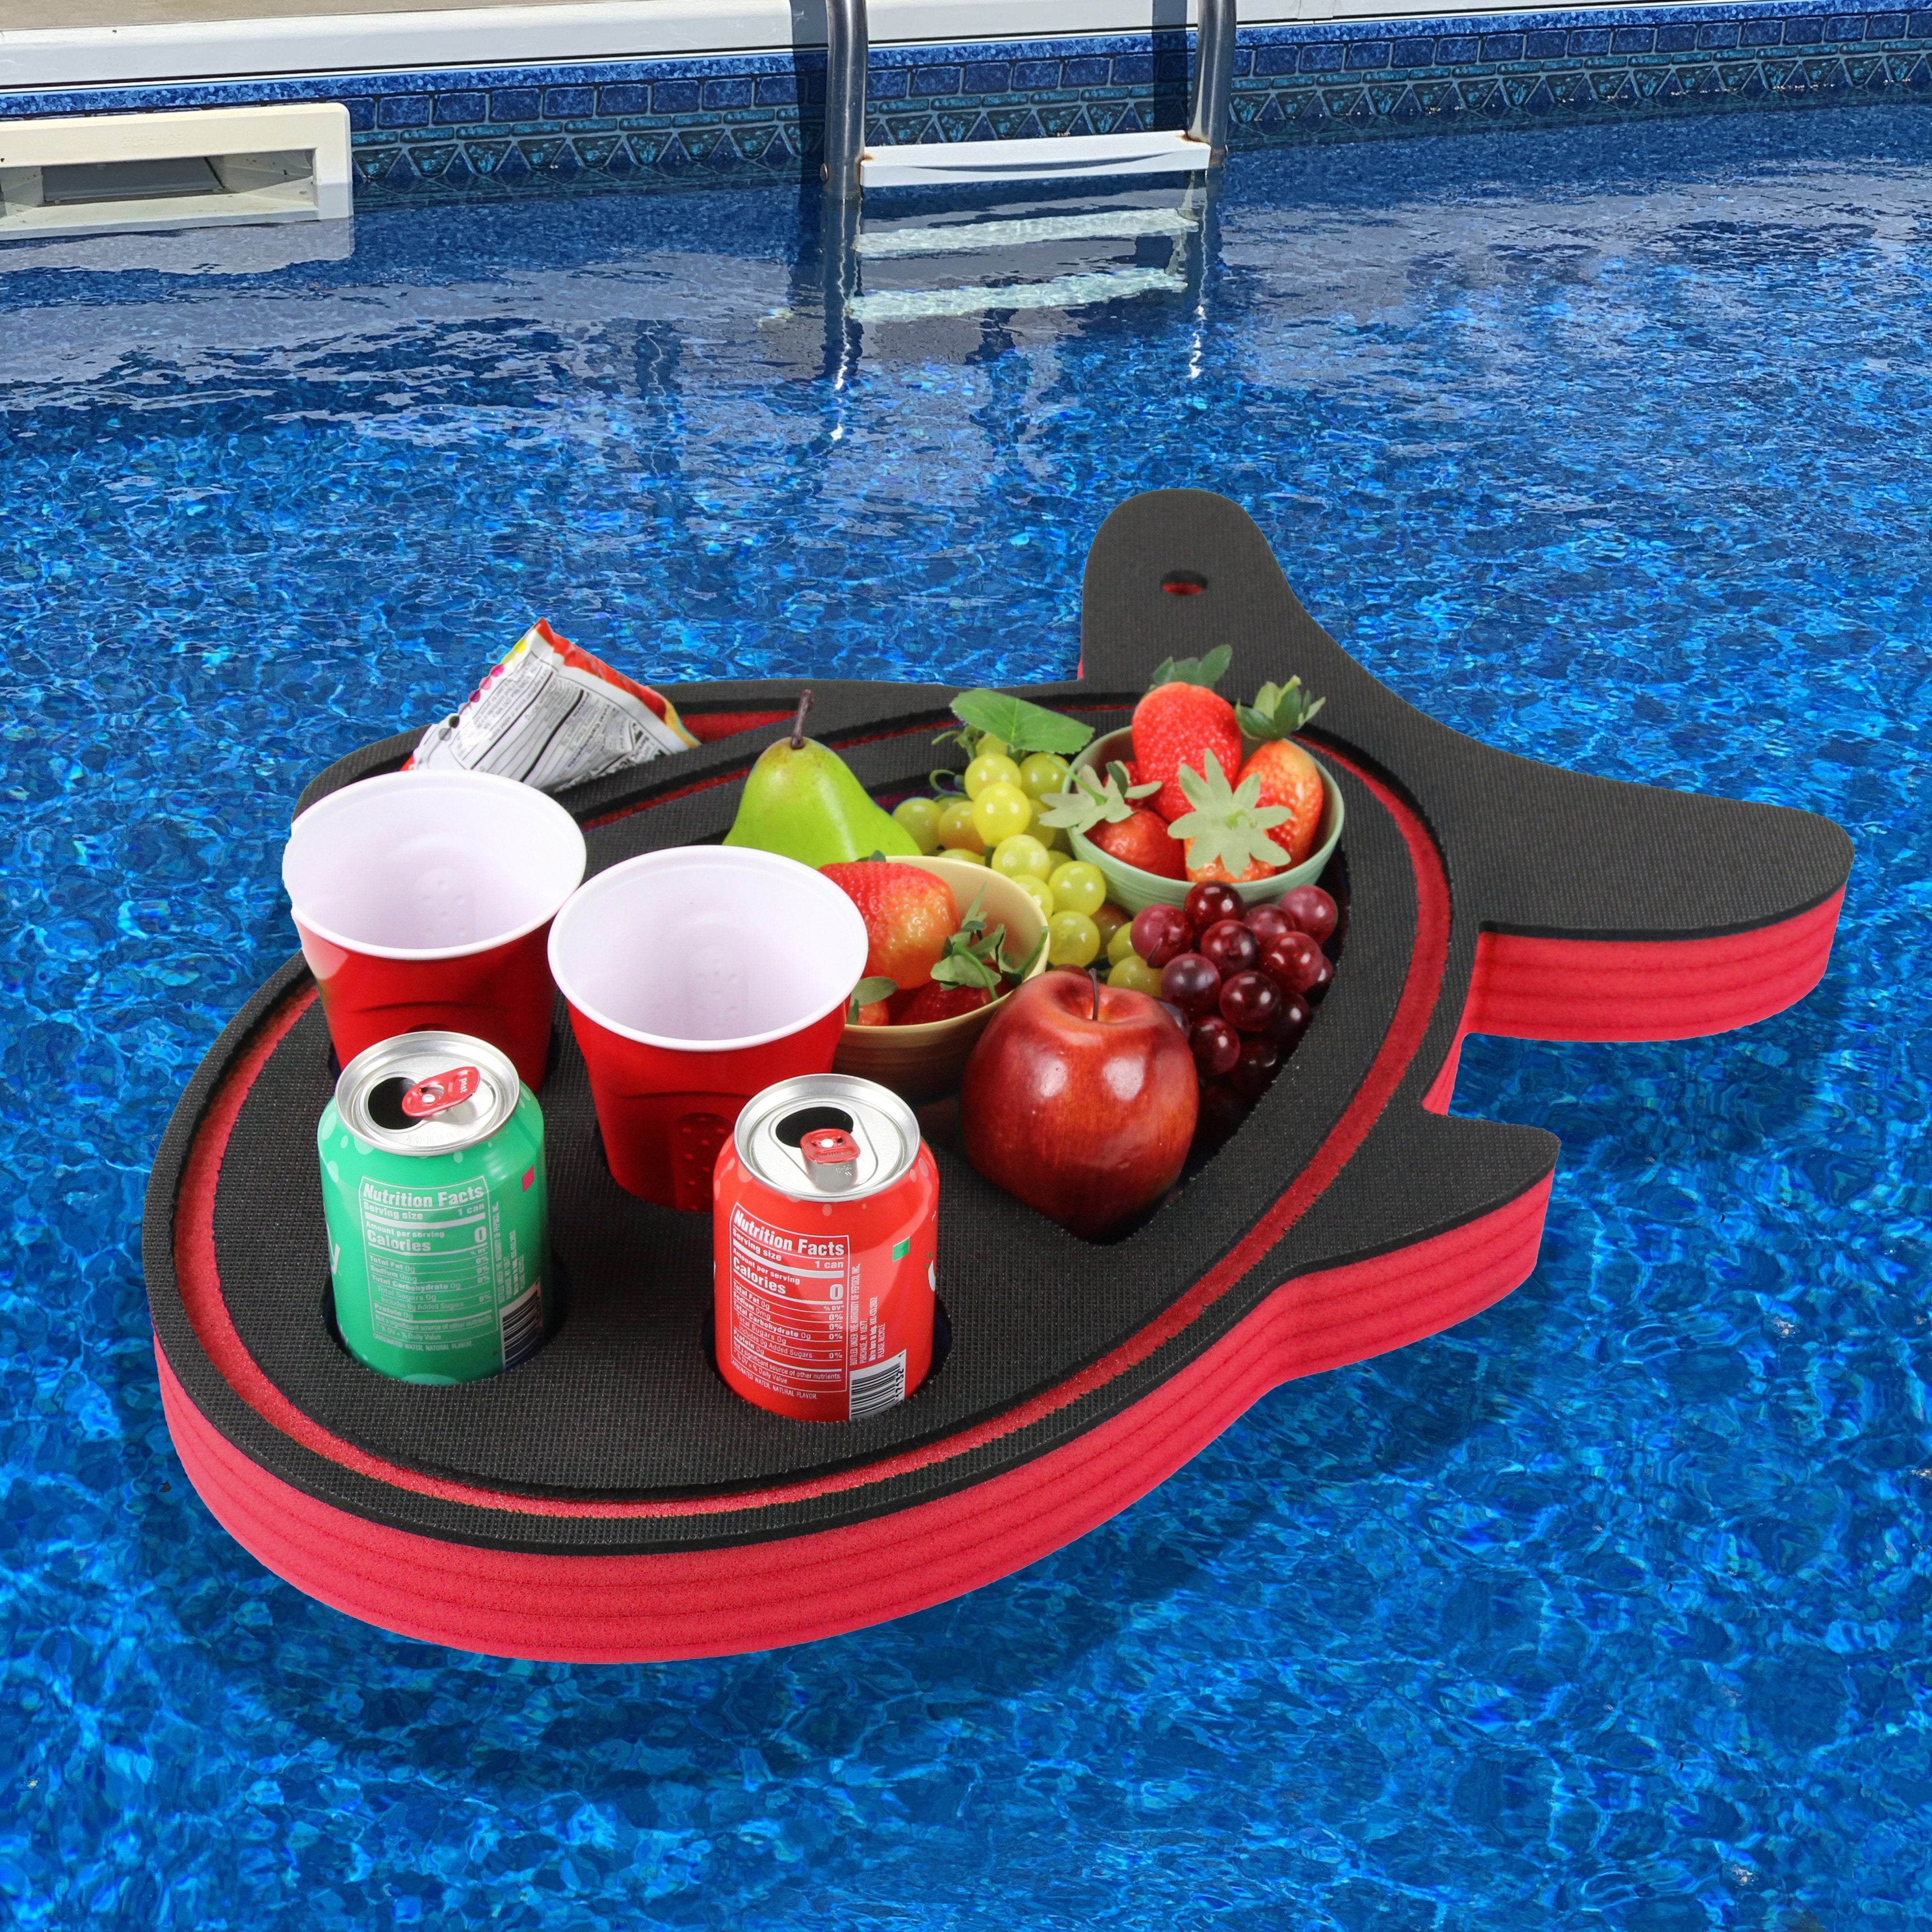 Floating Fish Drink Holder Red Refreshment Table Tray for Pool or Beach Party Float Lounge Durable 6 Compartment UV Resistant Cup Holders 2 Feet